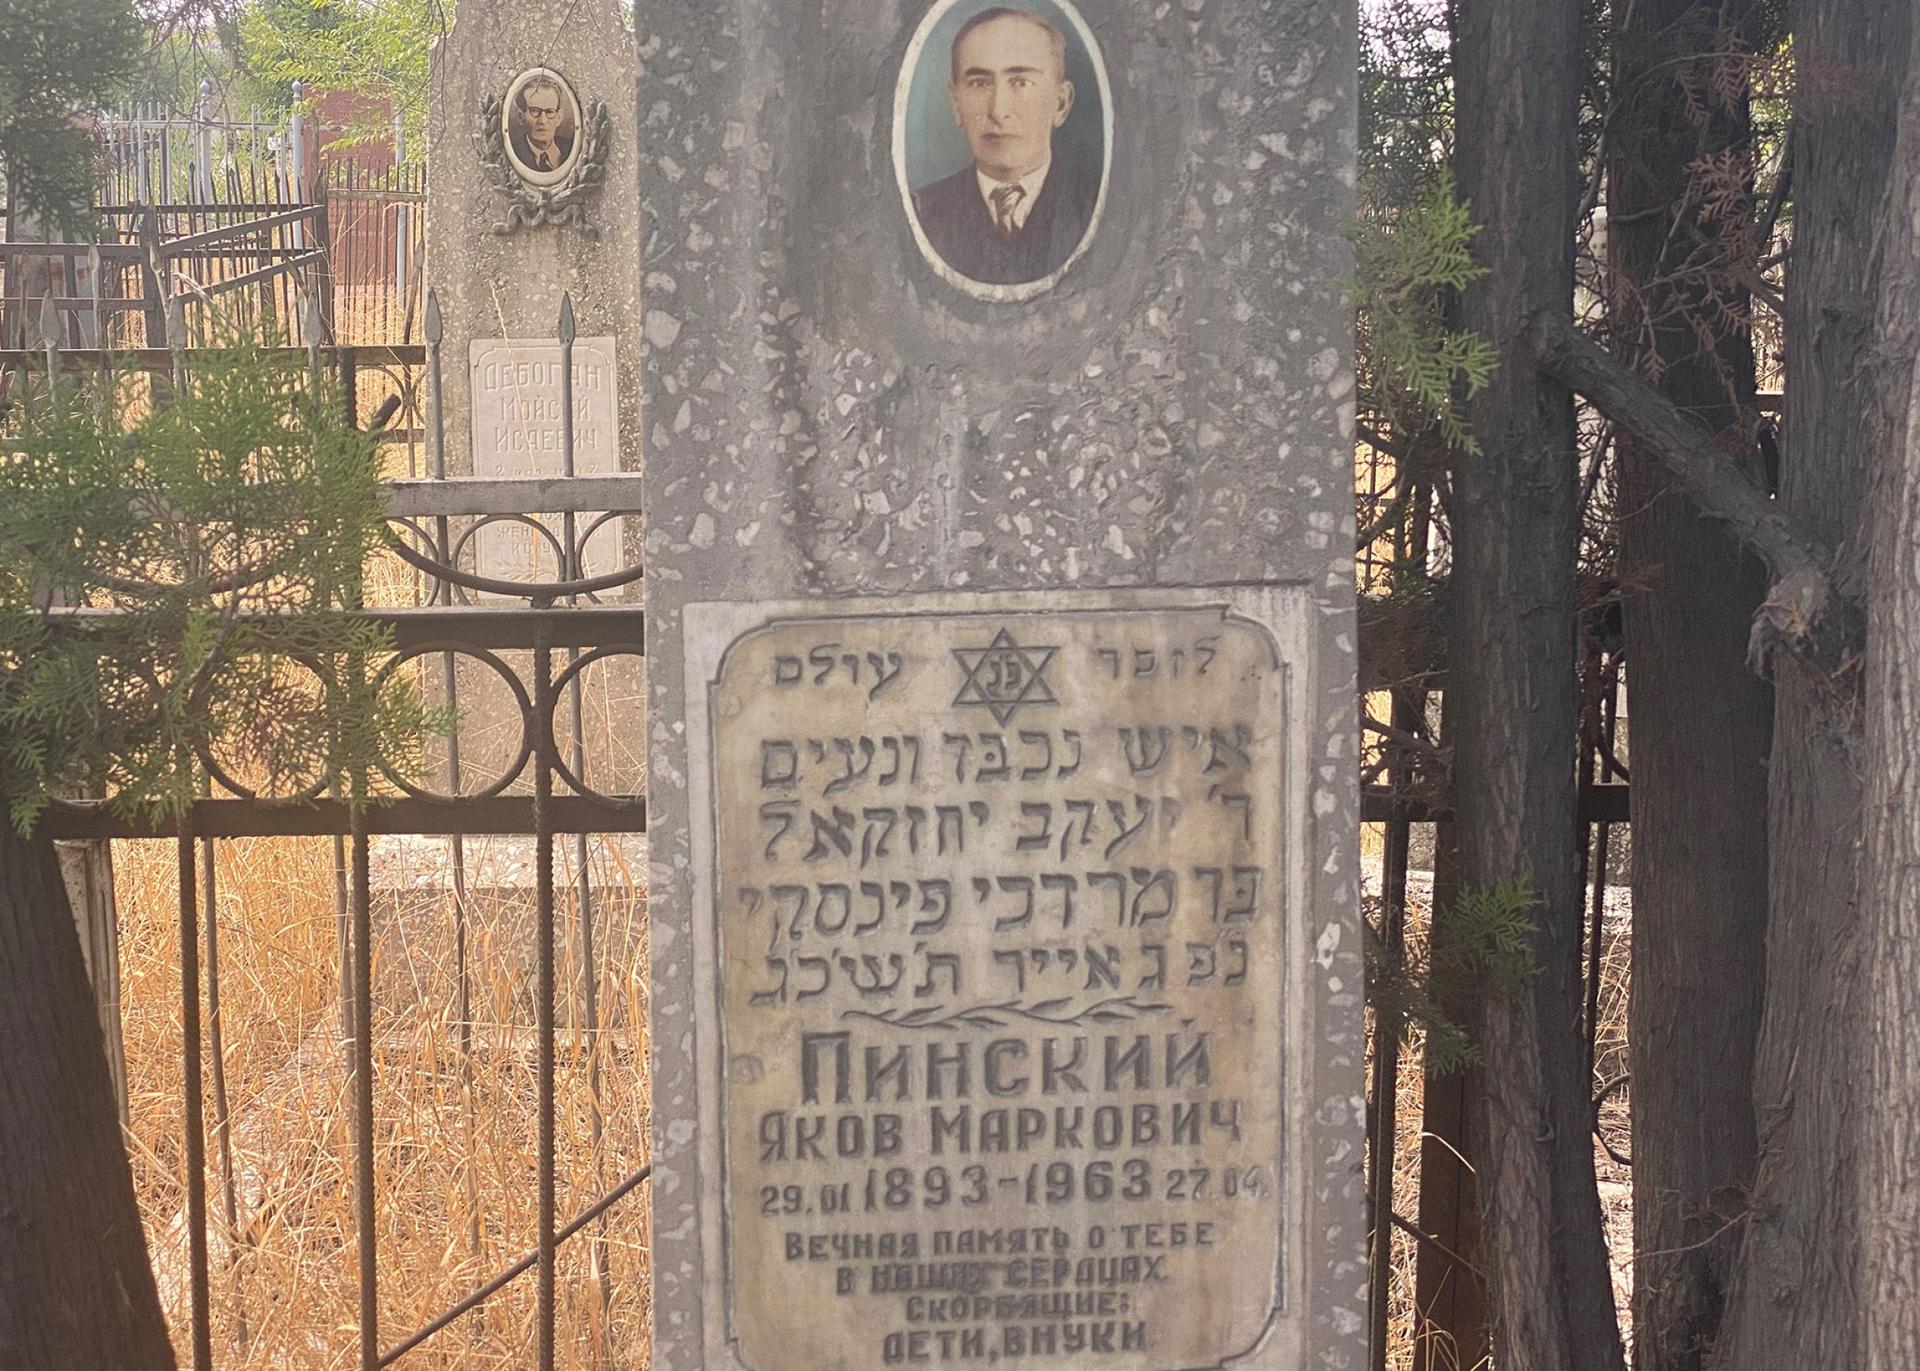 Many Jewish graves in Kyrgyzstan contain inscriptions in both Russian and Hebrew.